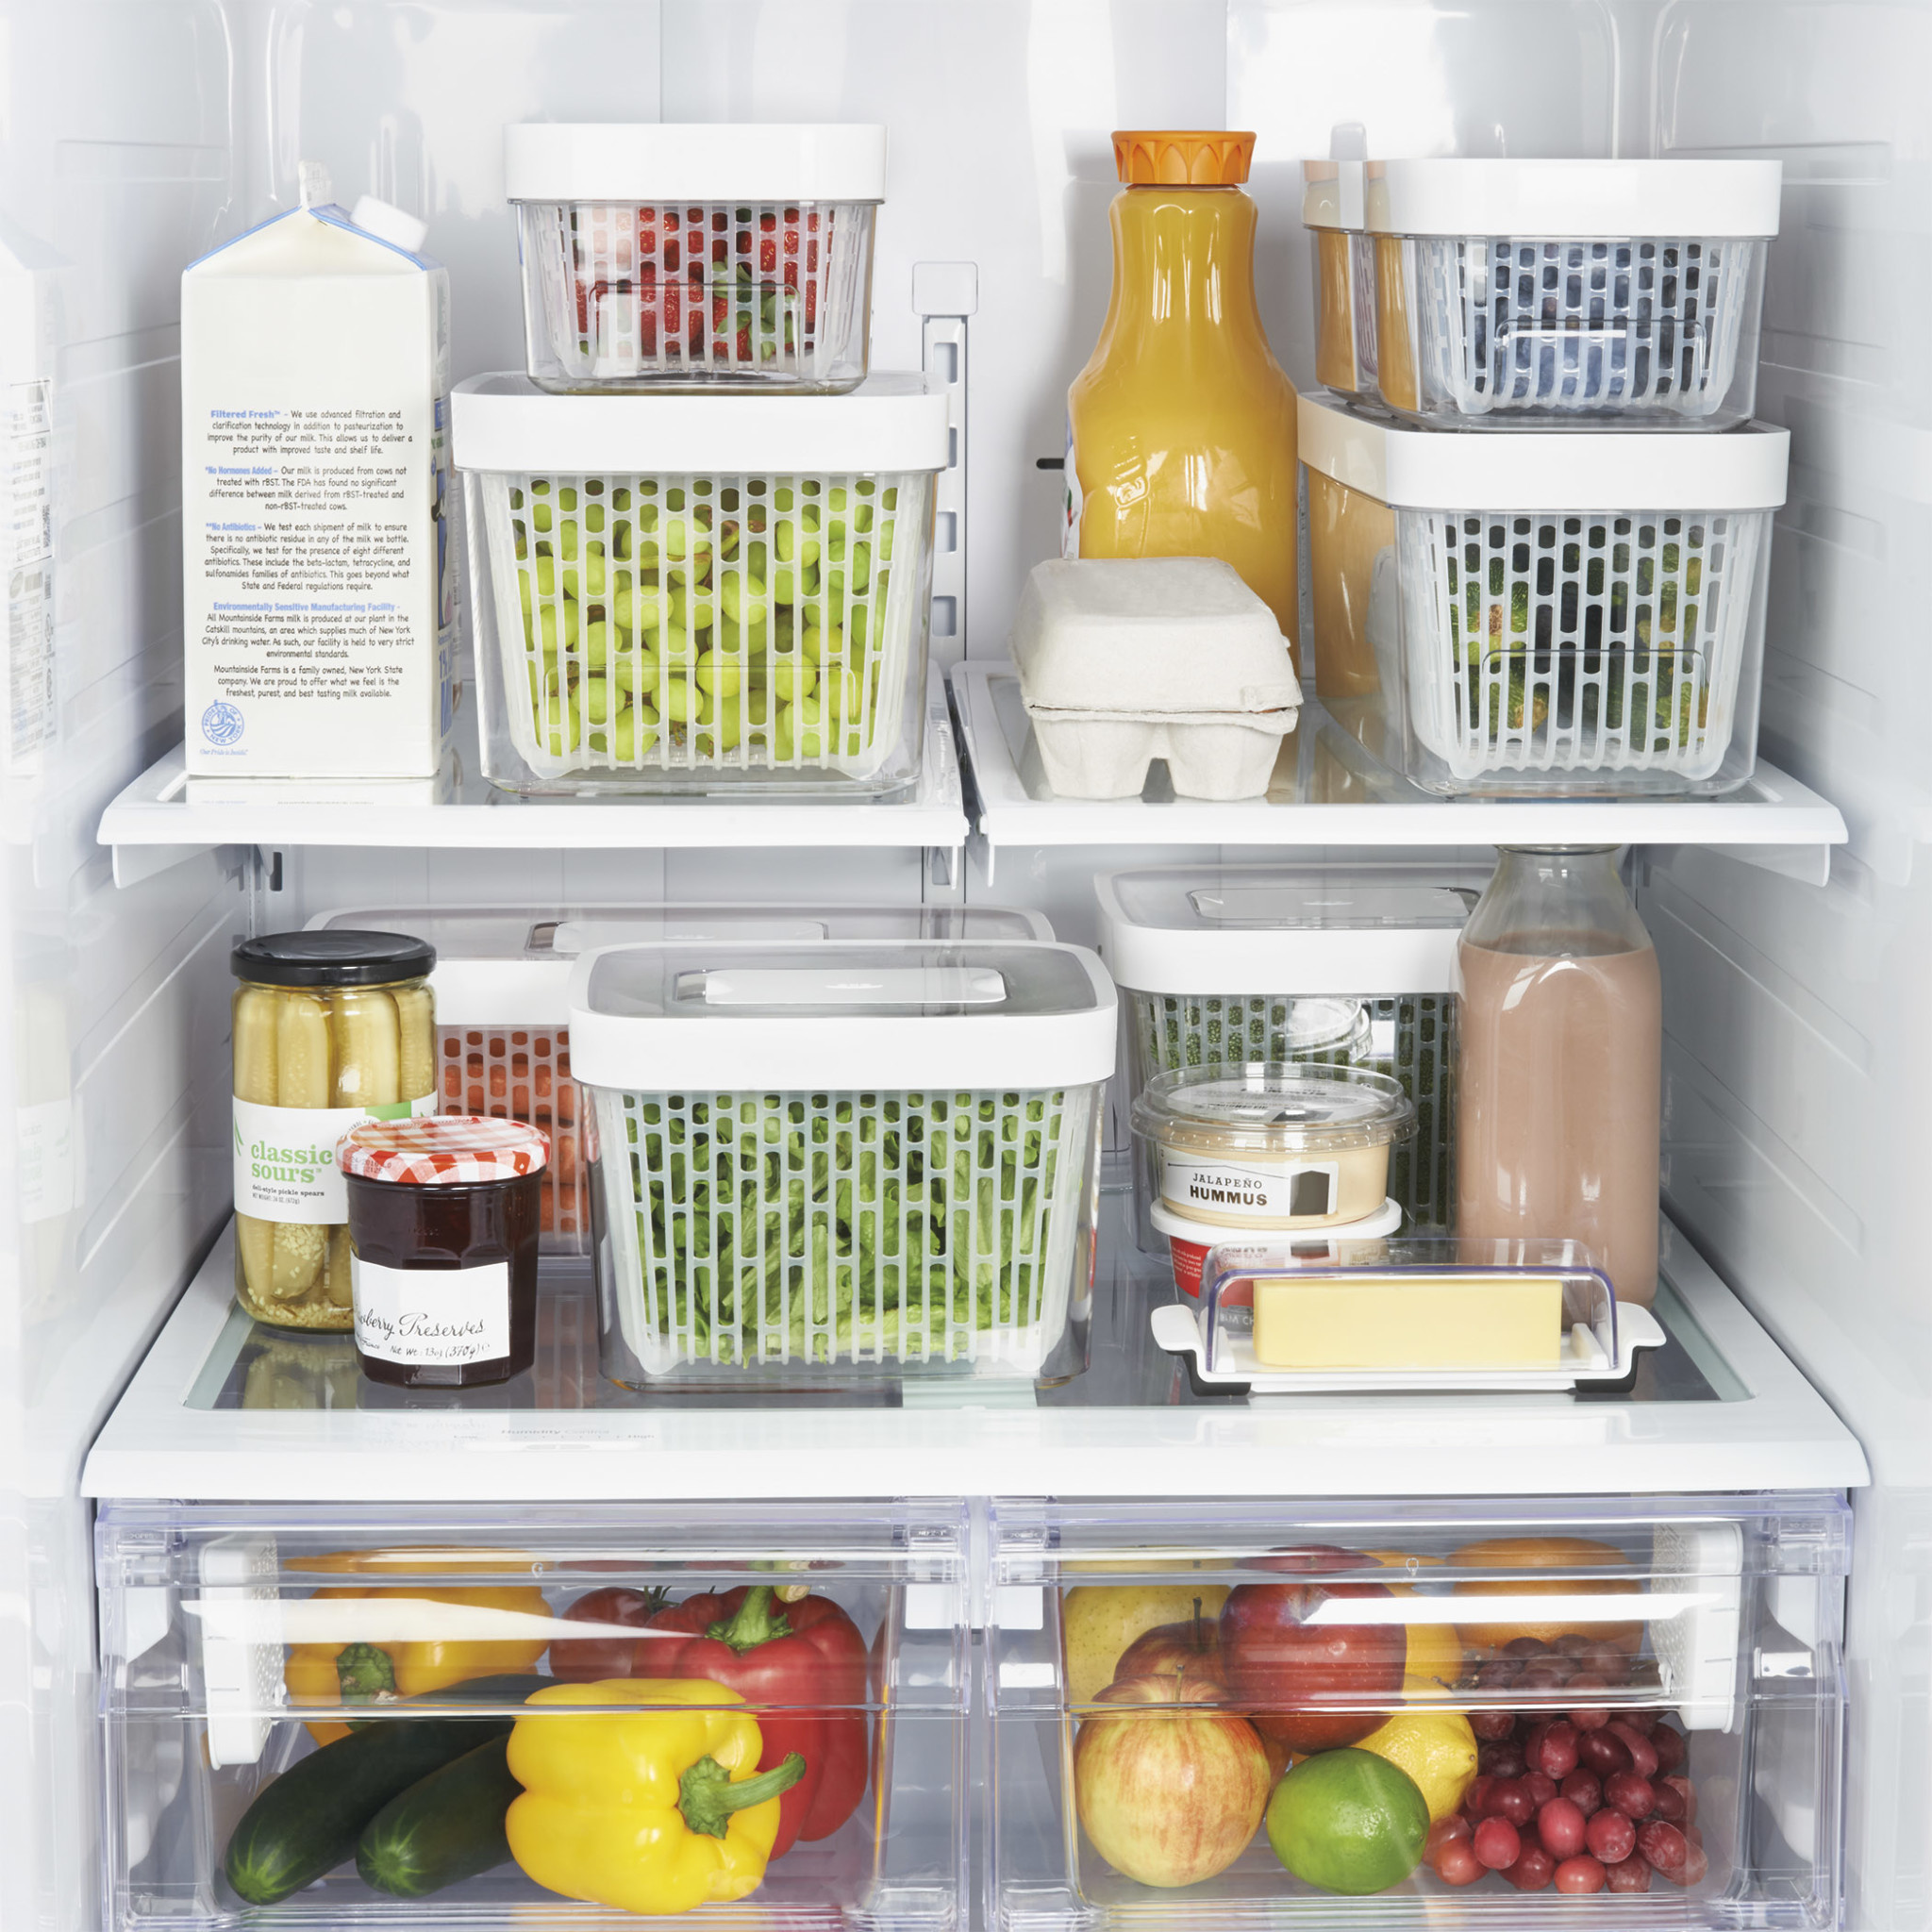 OXO Fridge Organization makes your refrigerator work for your family's